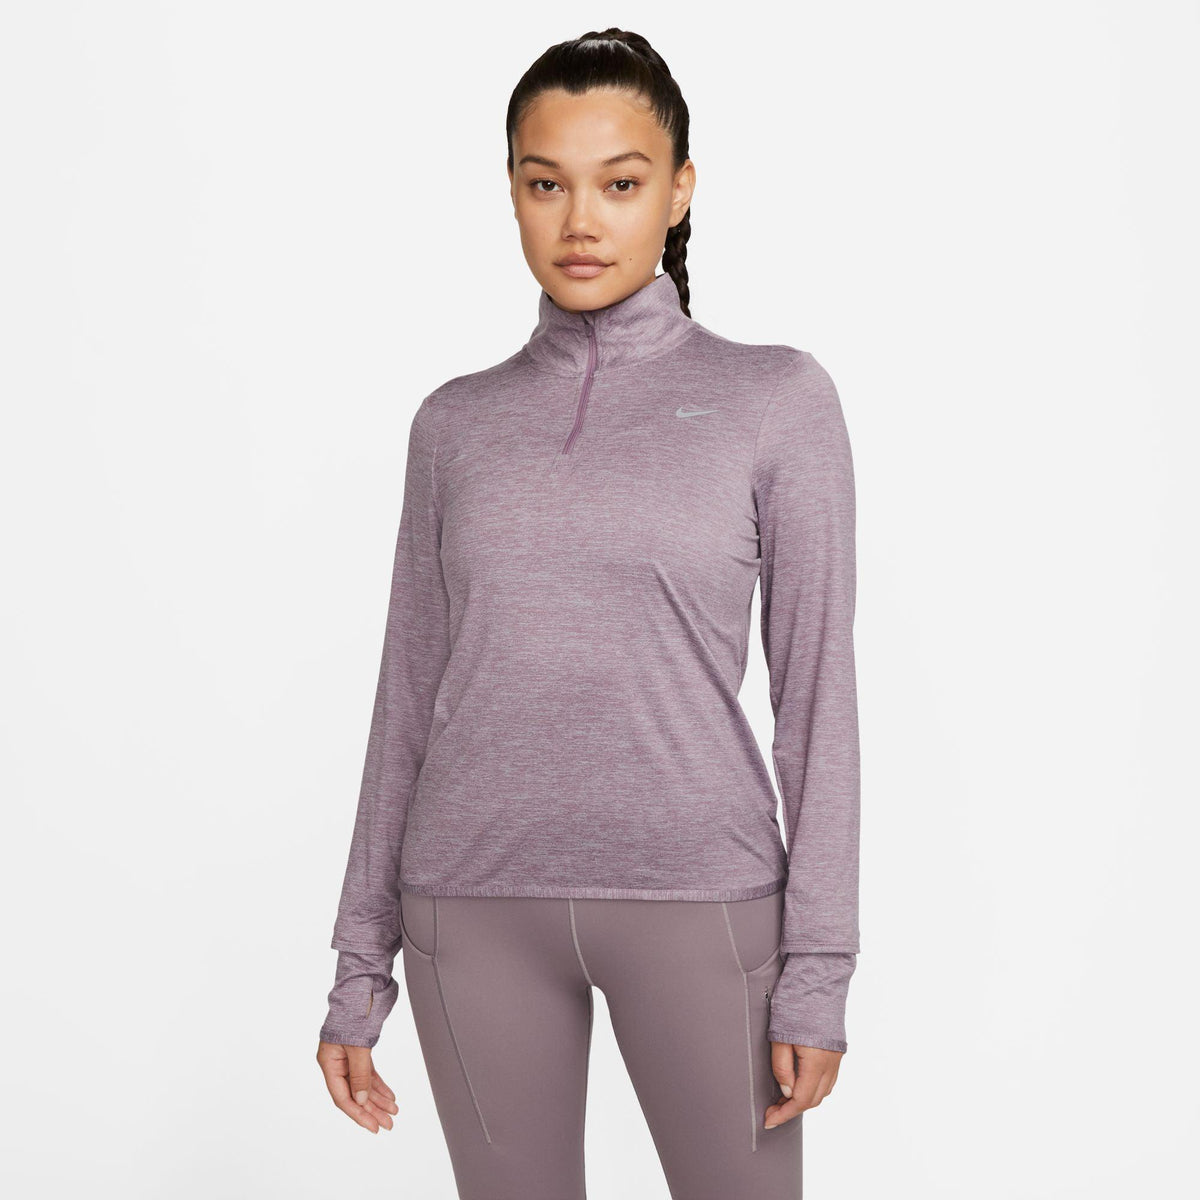 Nike-Women's Nike Dri-FIT Swift Element UV 1/4-Zip-Violet Dust/Pewter/Htr/Reflective Silv-Pacers Running